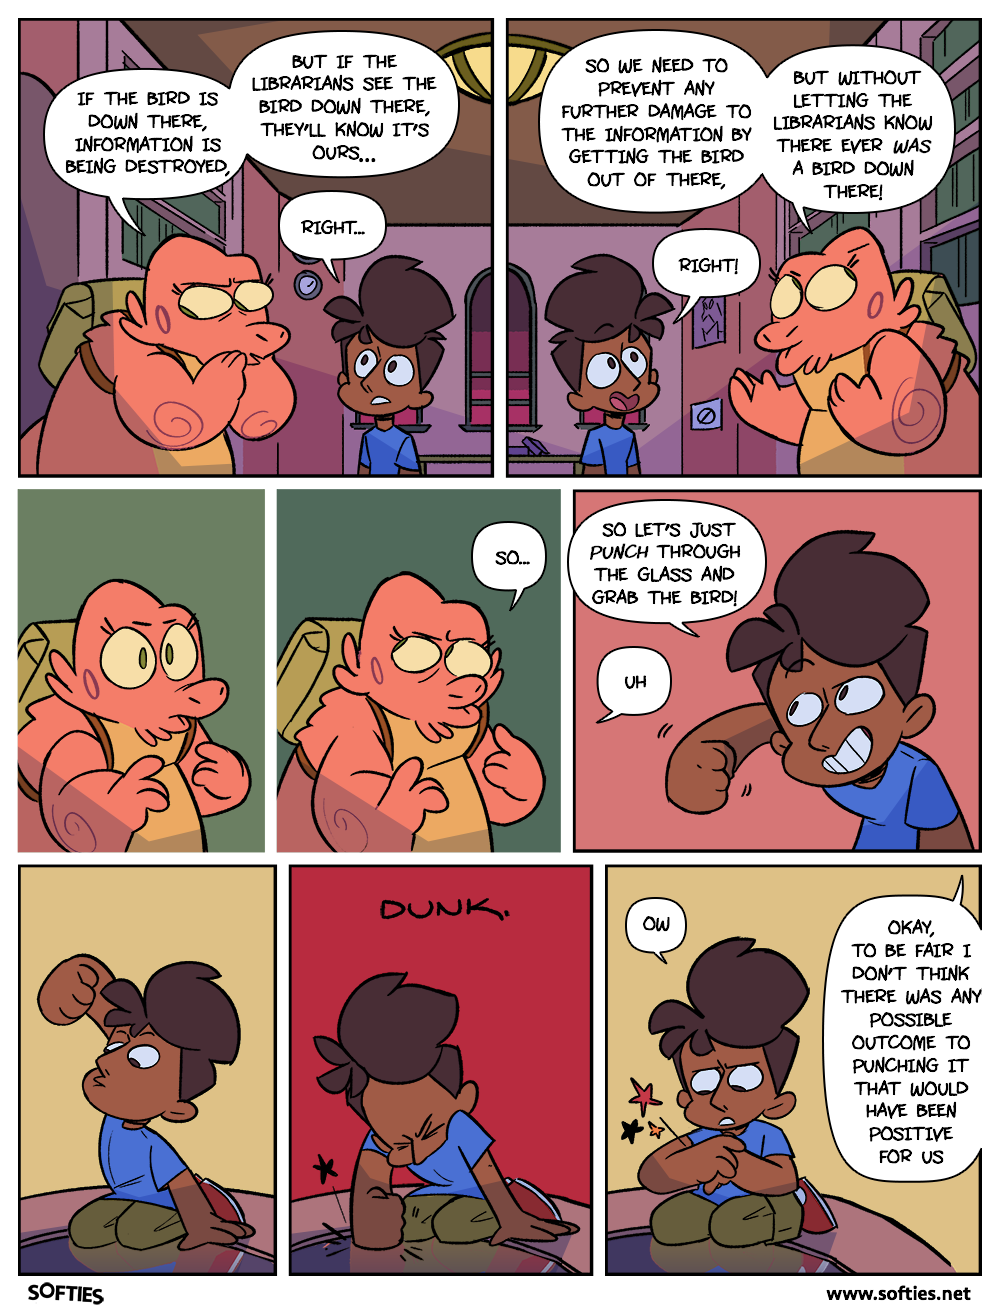 Softies Episode 2, Page 18